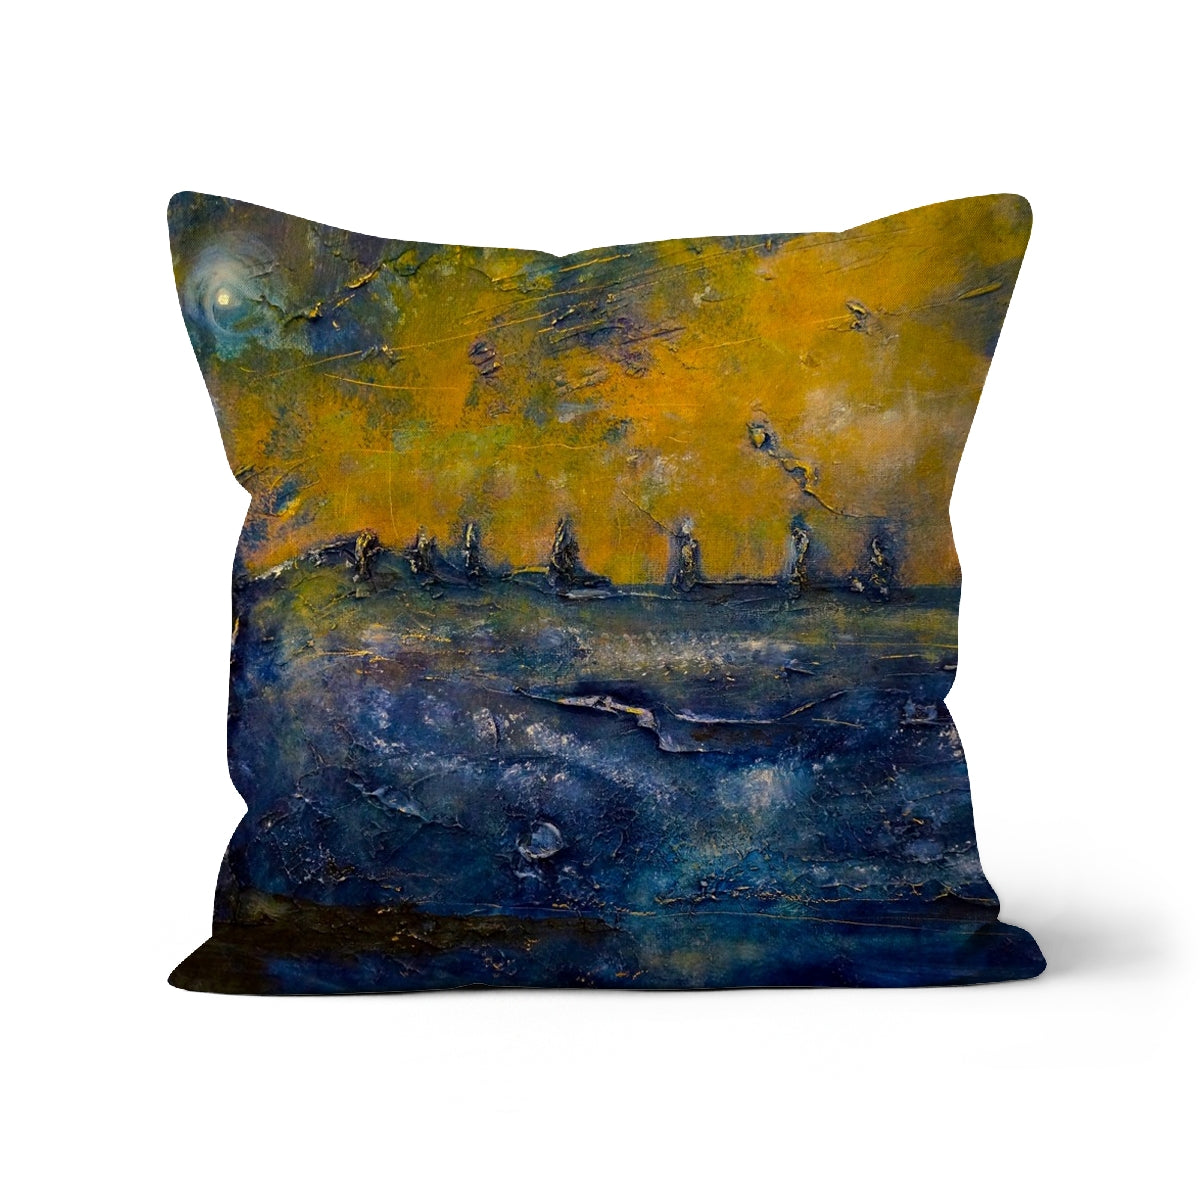 Brodgar Moonlight Orkney Art Gifts Cushion-Cushions-Orkney Art Gallery-Faux Suede-16"x16"-Paintings, Prints, Homeware, Art Gifts From Scotland By Scottish Artist Kevin Hunter